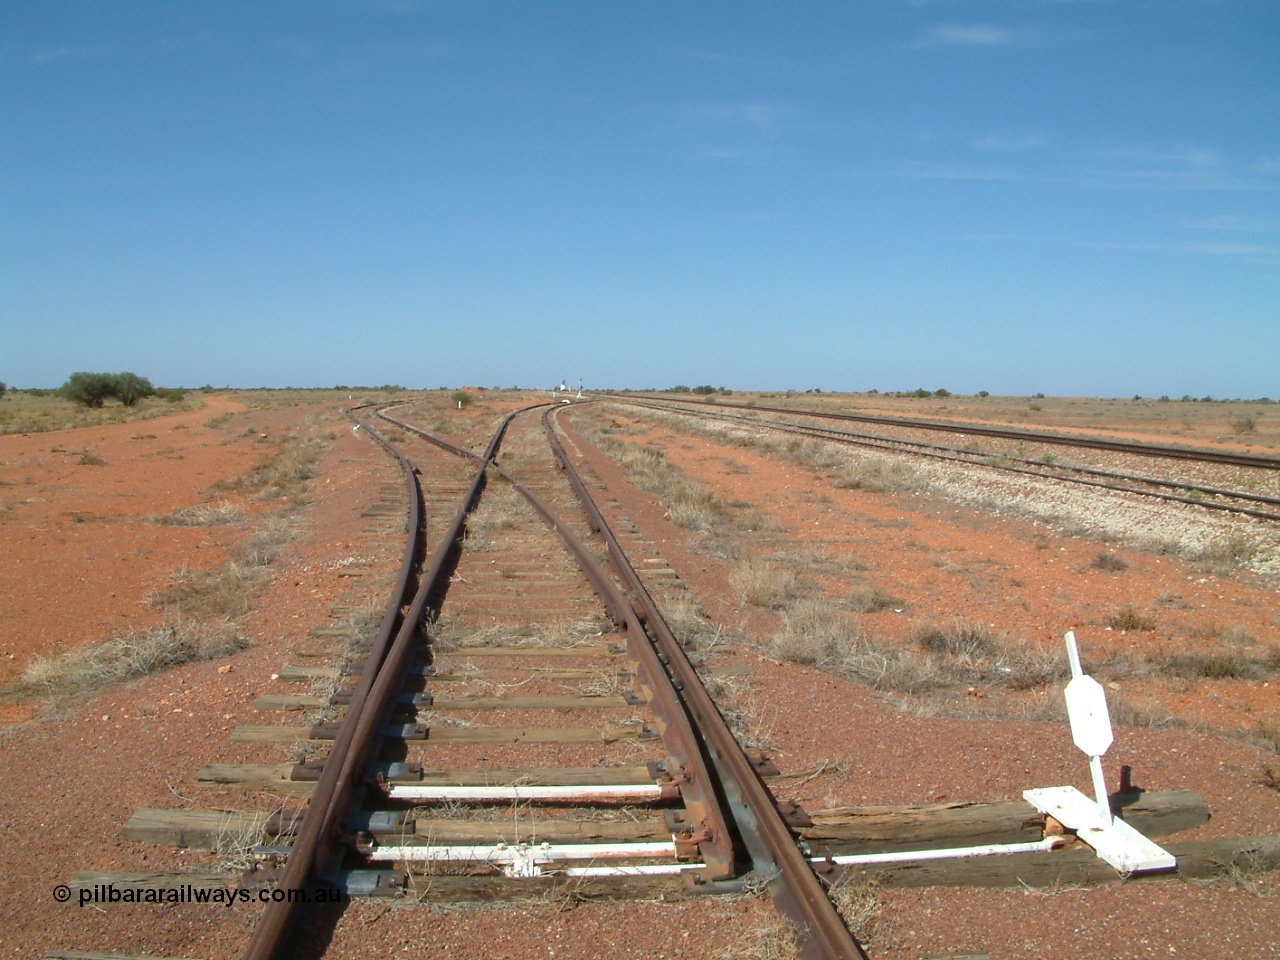 030416 105908
Manguri Siding, looking south at the end of the goods loop with a loading ramp deadend siding off to the left. Located 706.5 km from the 0 datum at Coonamia and 200 km north of Tarcoola between Wirrida and Cadney Park on the Tarcoola - Alice Springs line. [url=https://goo.gl/maps/Nohh3U8BSTposHKV9]GeoData location[/url]. 16th April 2003.
